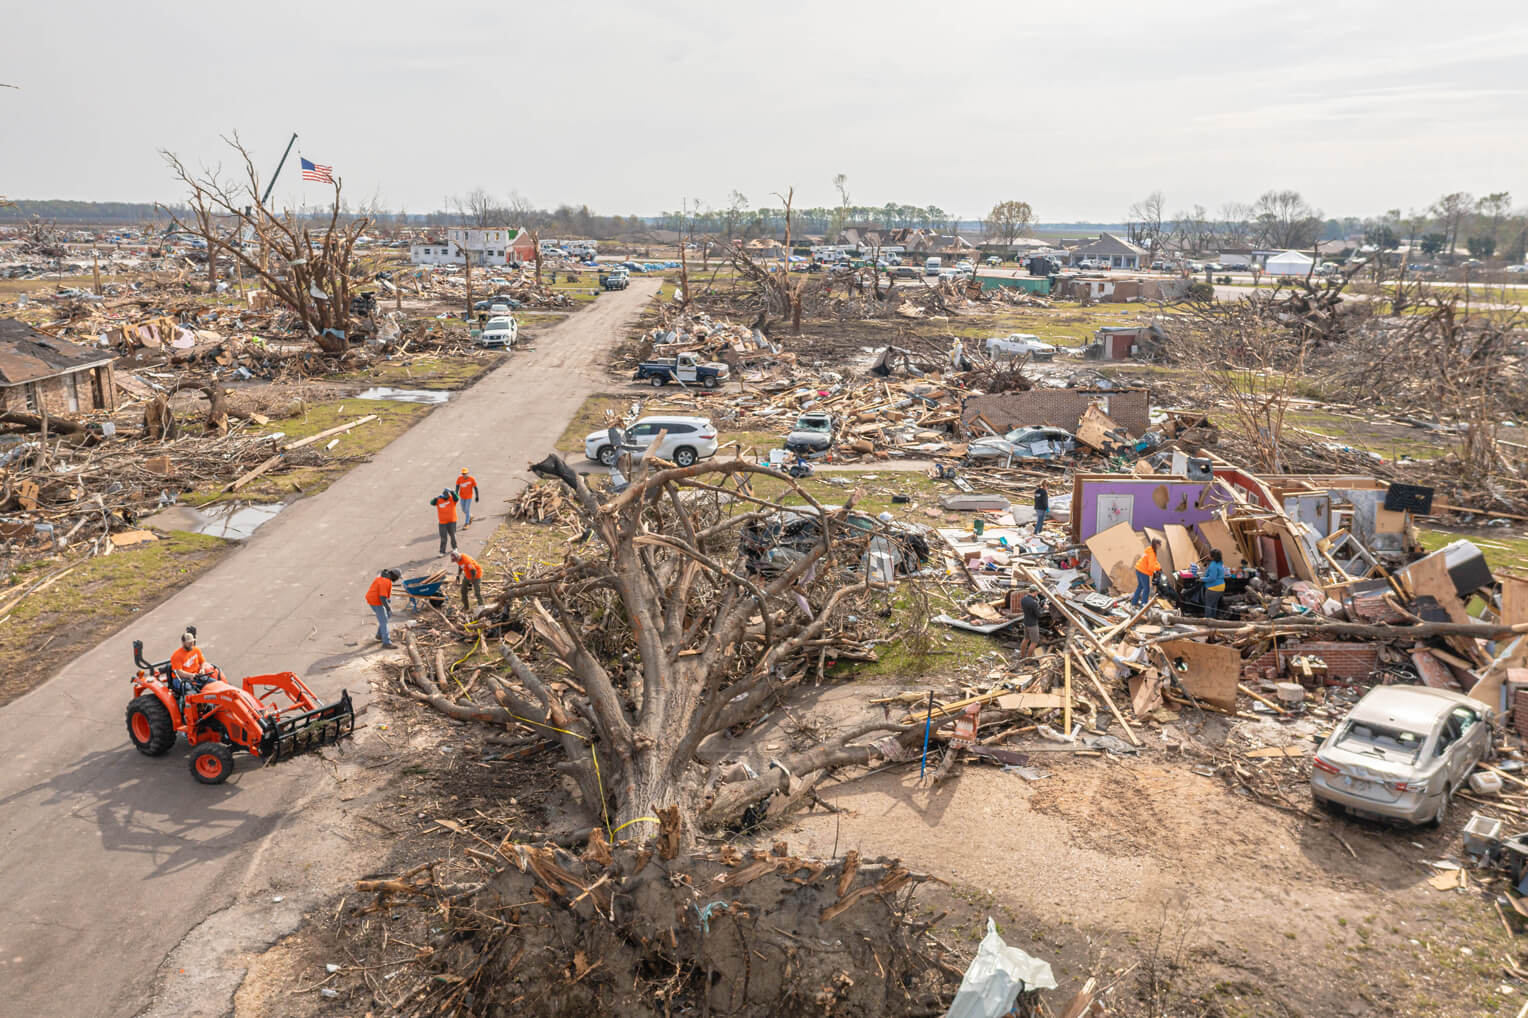 The tornado that hit Rolling Fork left behind an incredible trail of destruction.